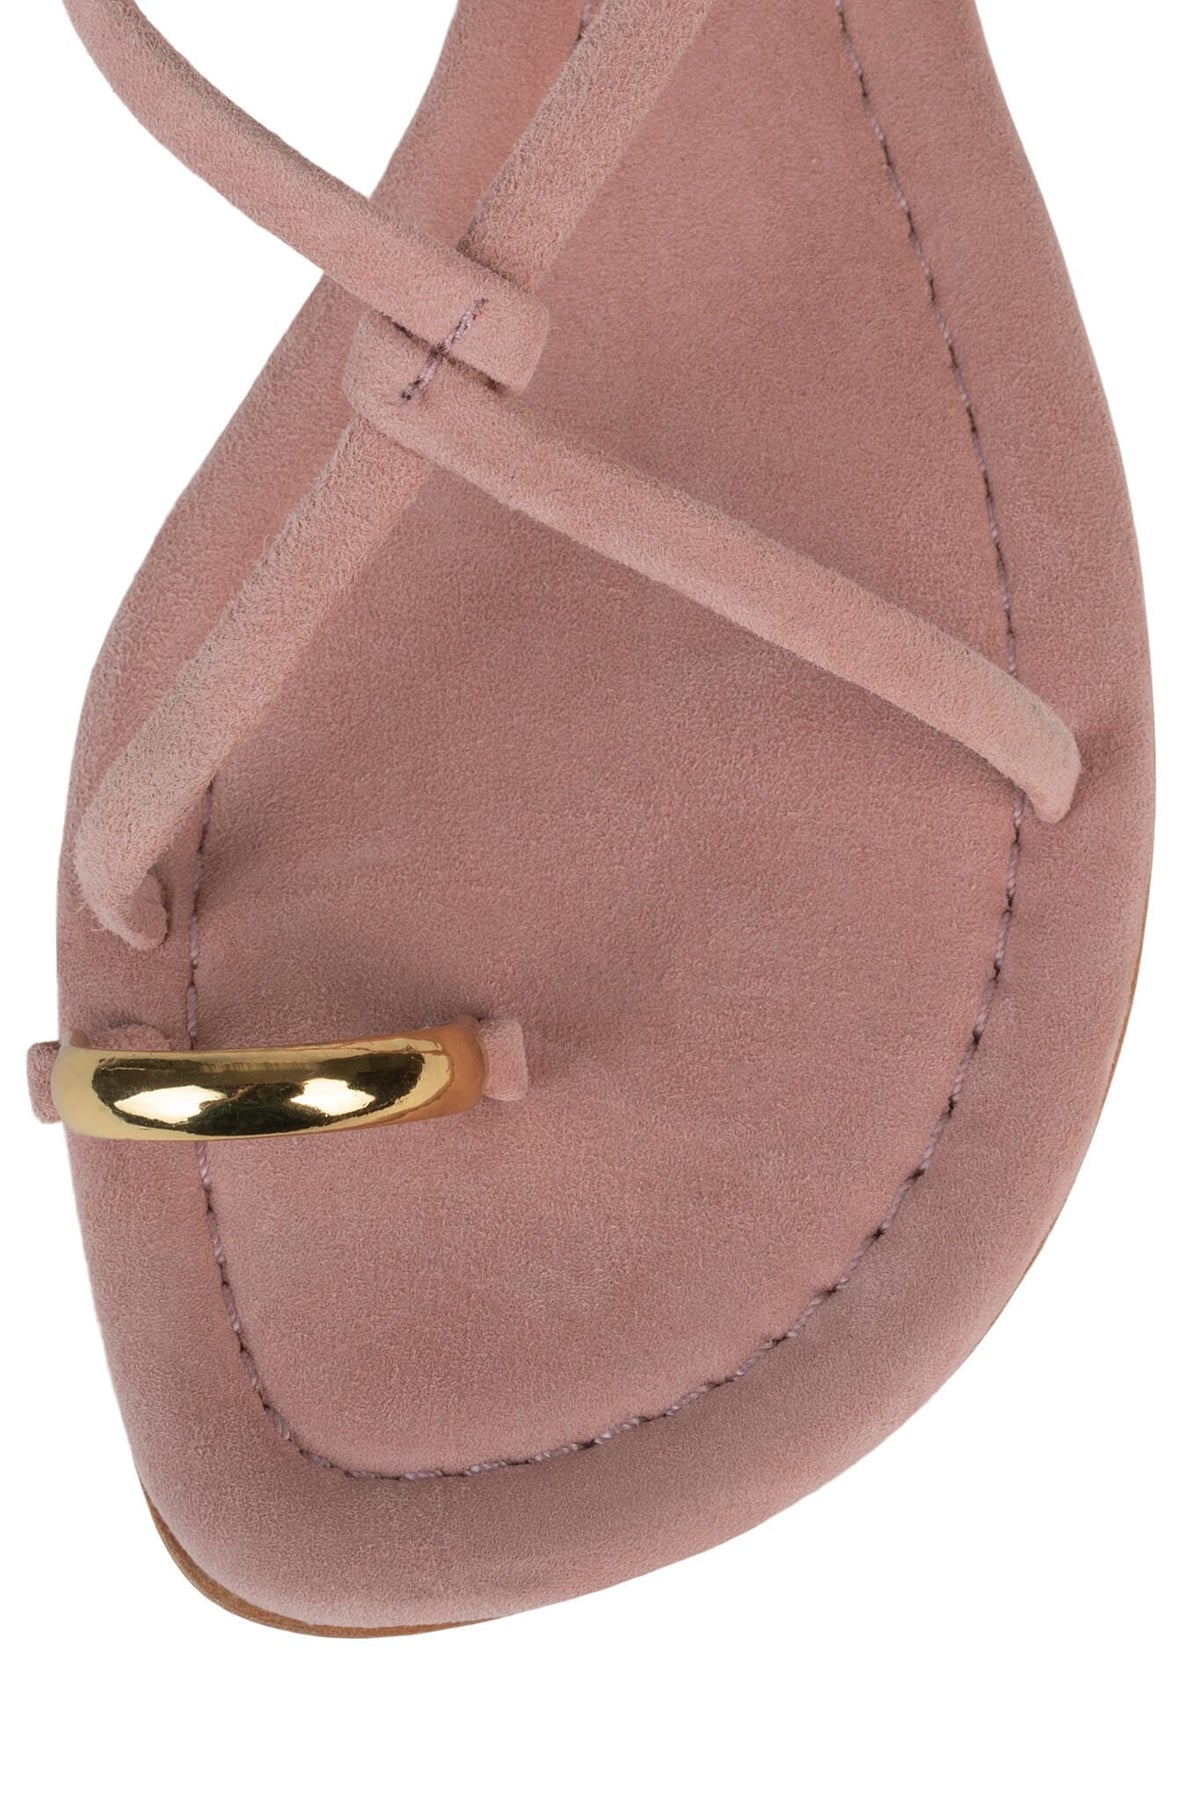 PACIFICO Jeffrey Campbell Flat Sandals Light Pink Suede Gold